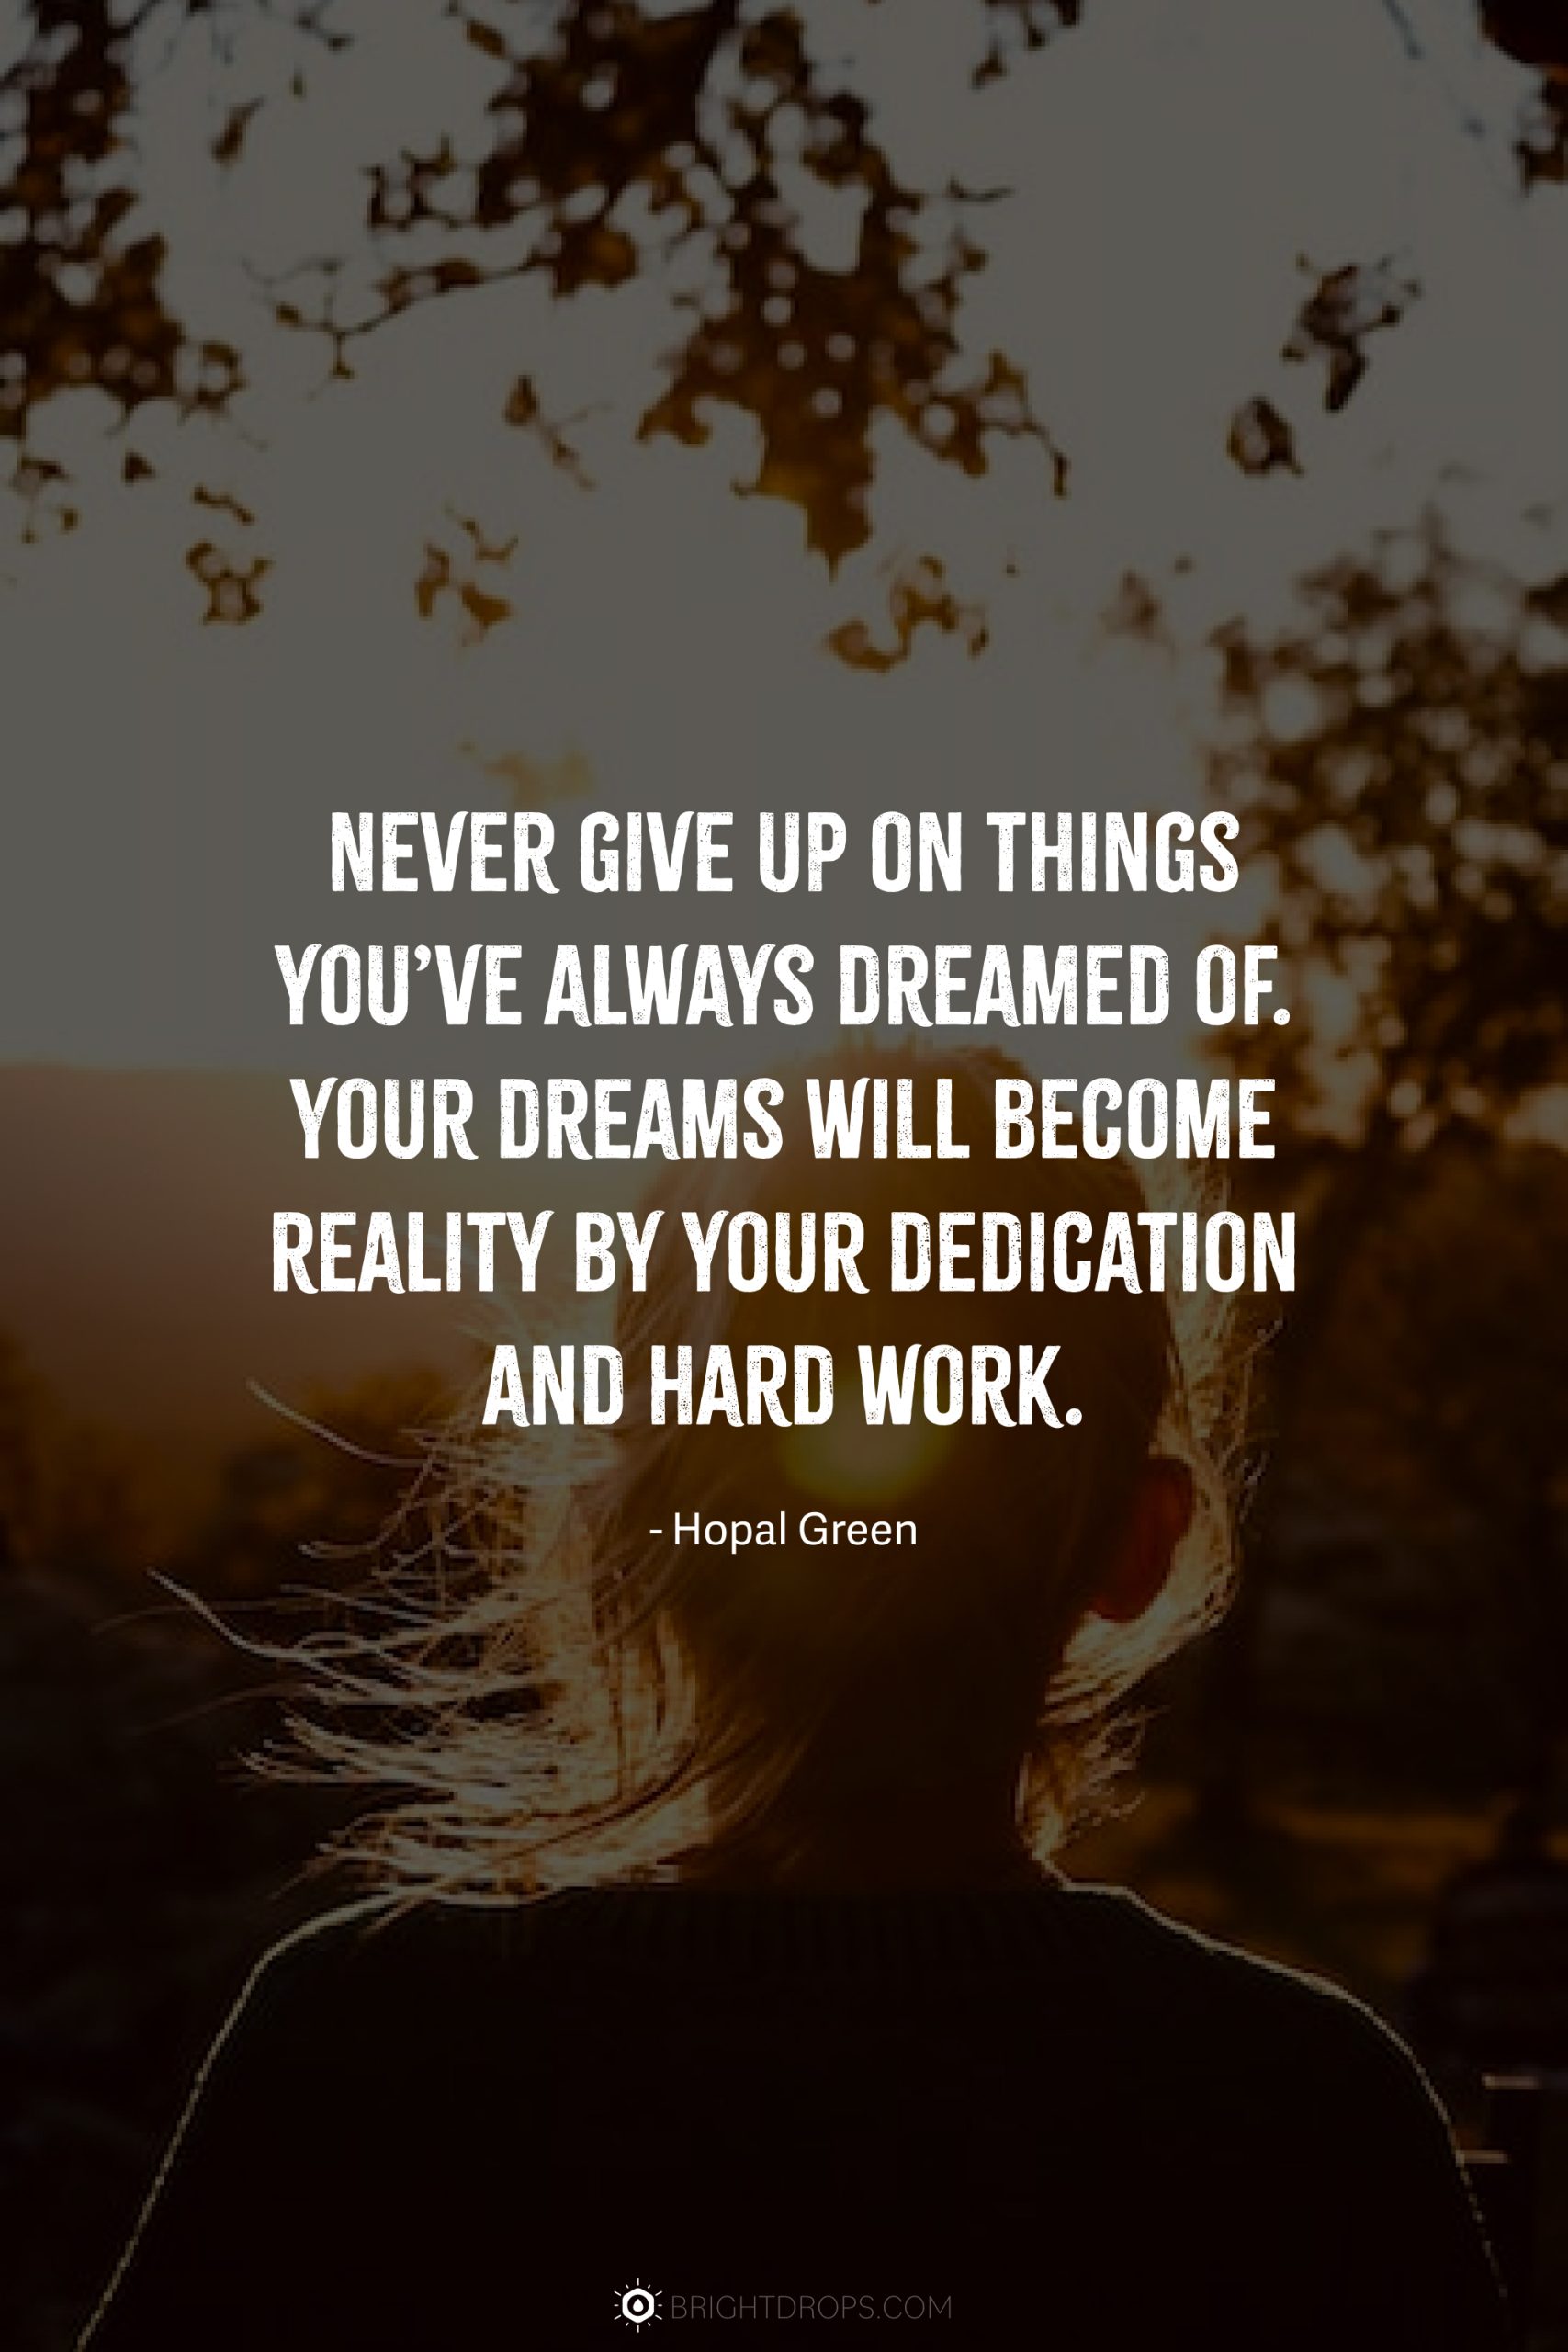 Never give up on things you’ve always dreamed of. Your dreams will become reality by your dedication and hard work.